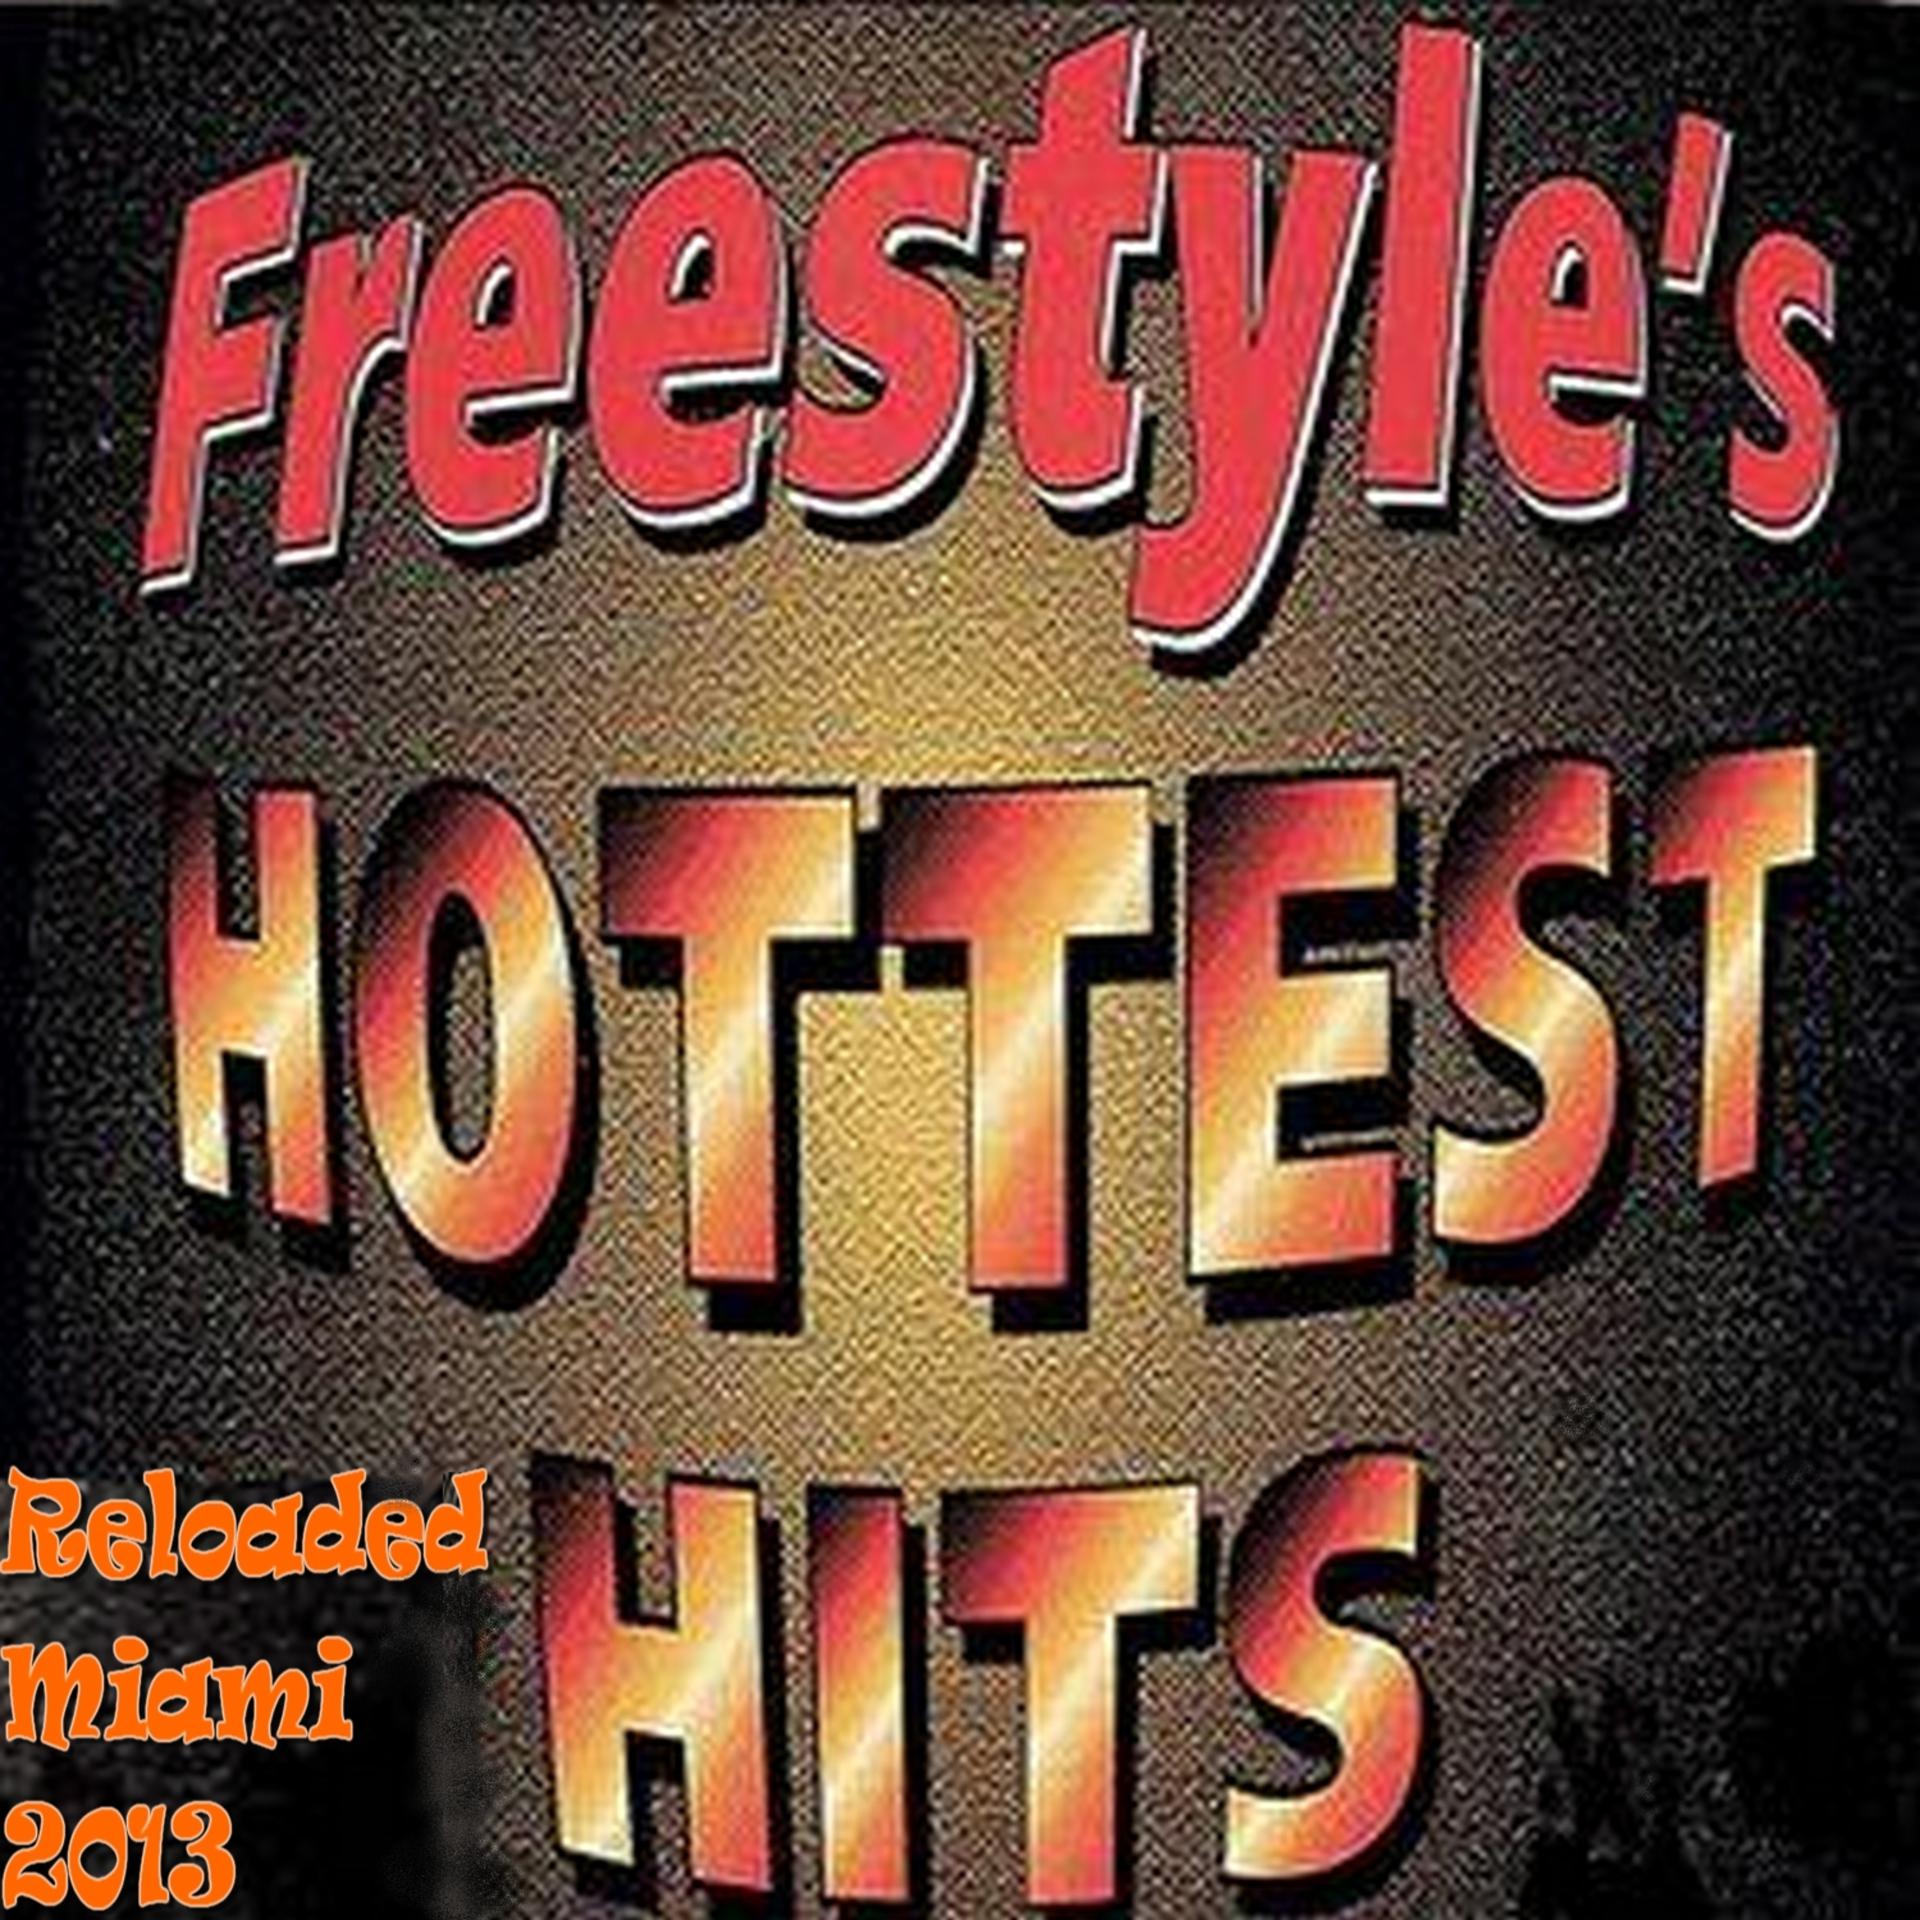 Постер альбома Freestyle's Hottest Hits Reloaded Miami 2013